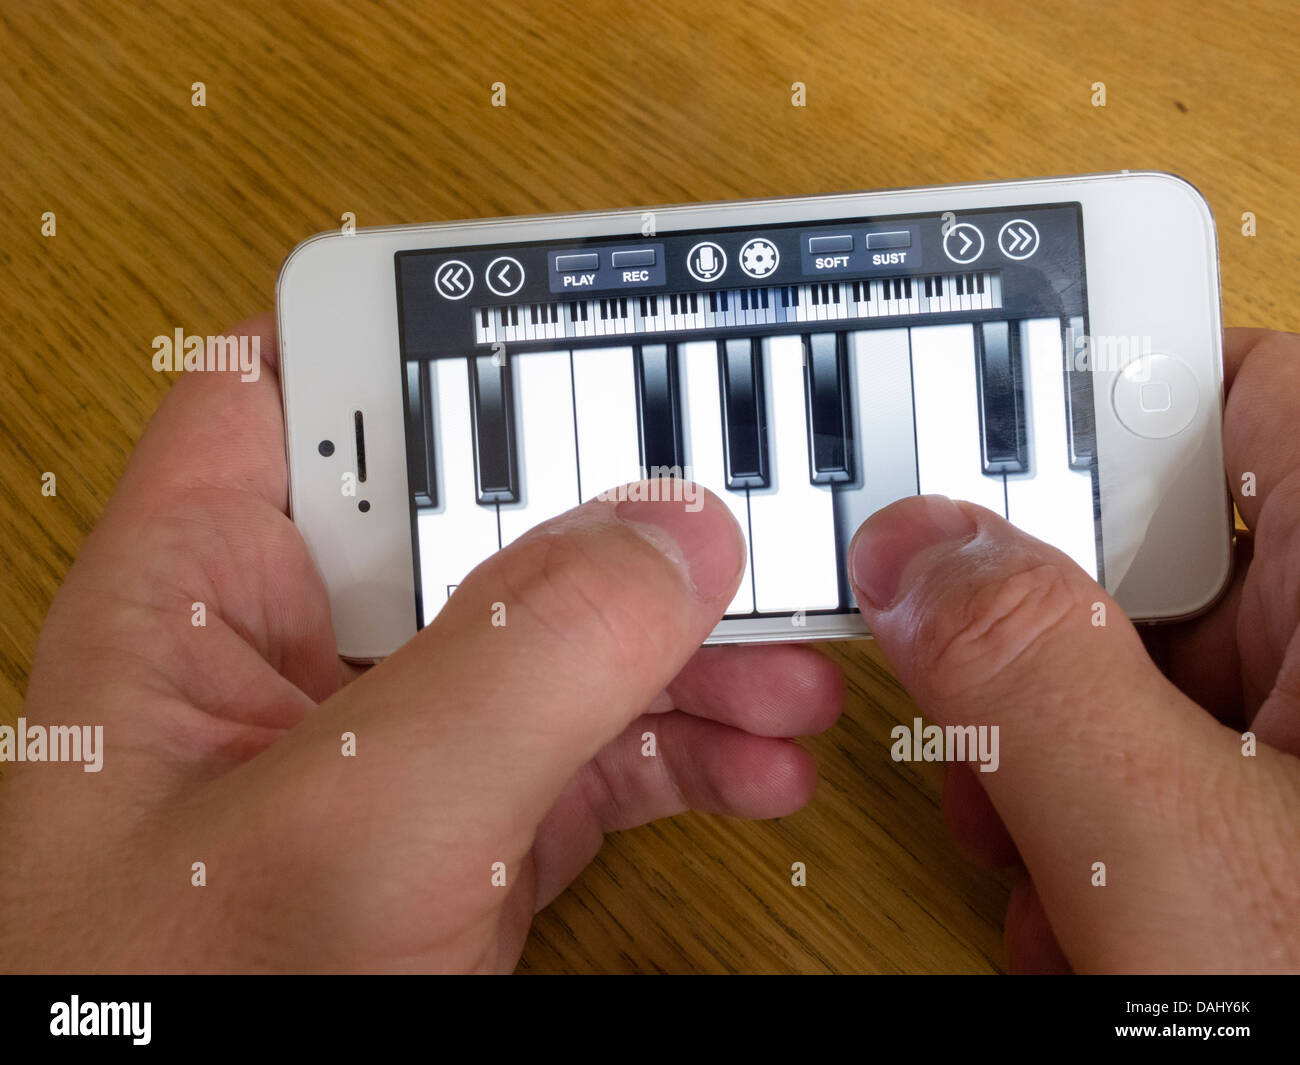 using white iPhone 5 smartphone to play music with piano app with touch ketboard Stock Photo